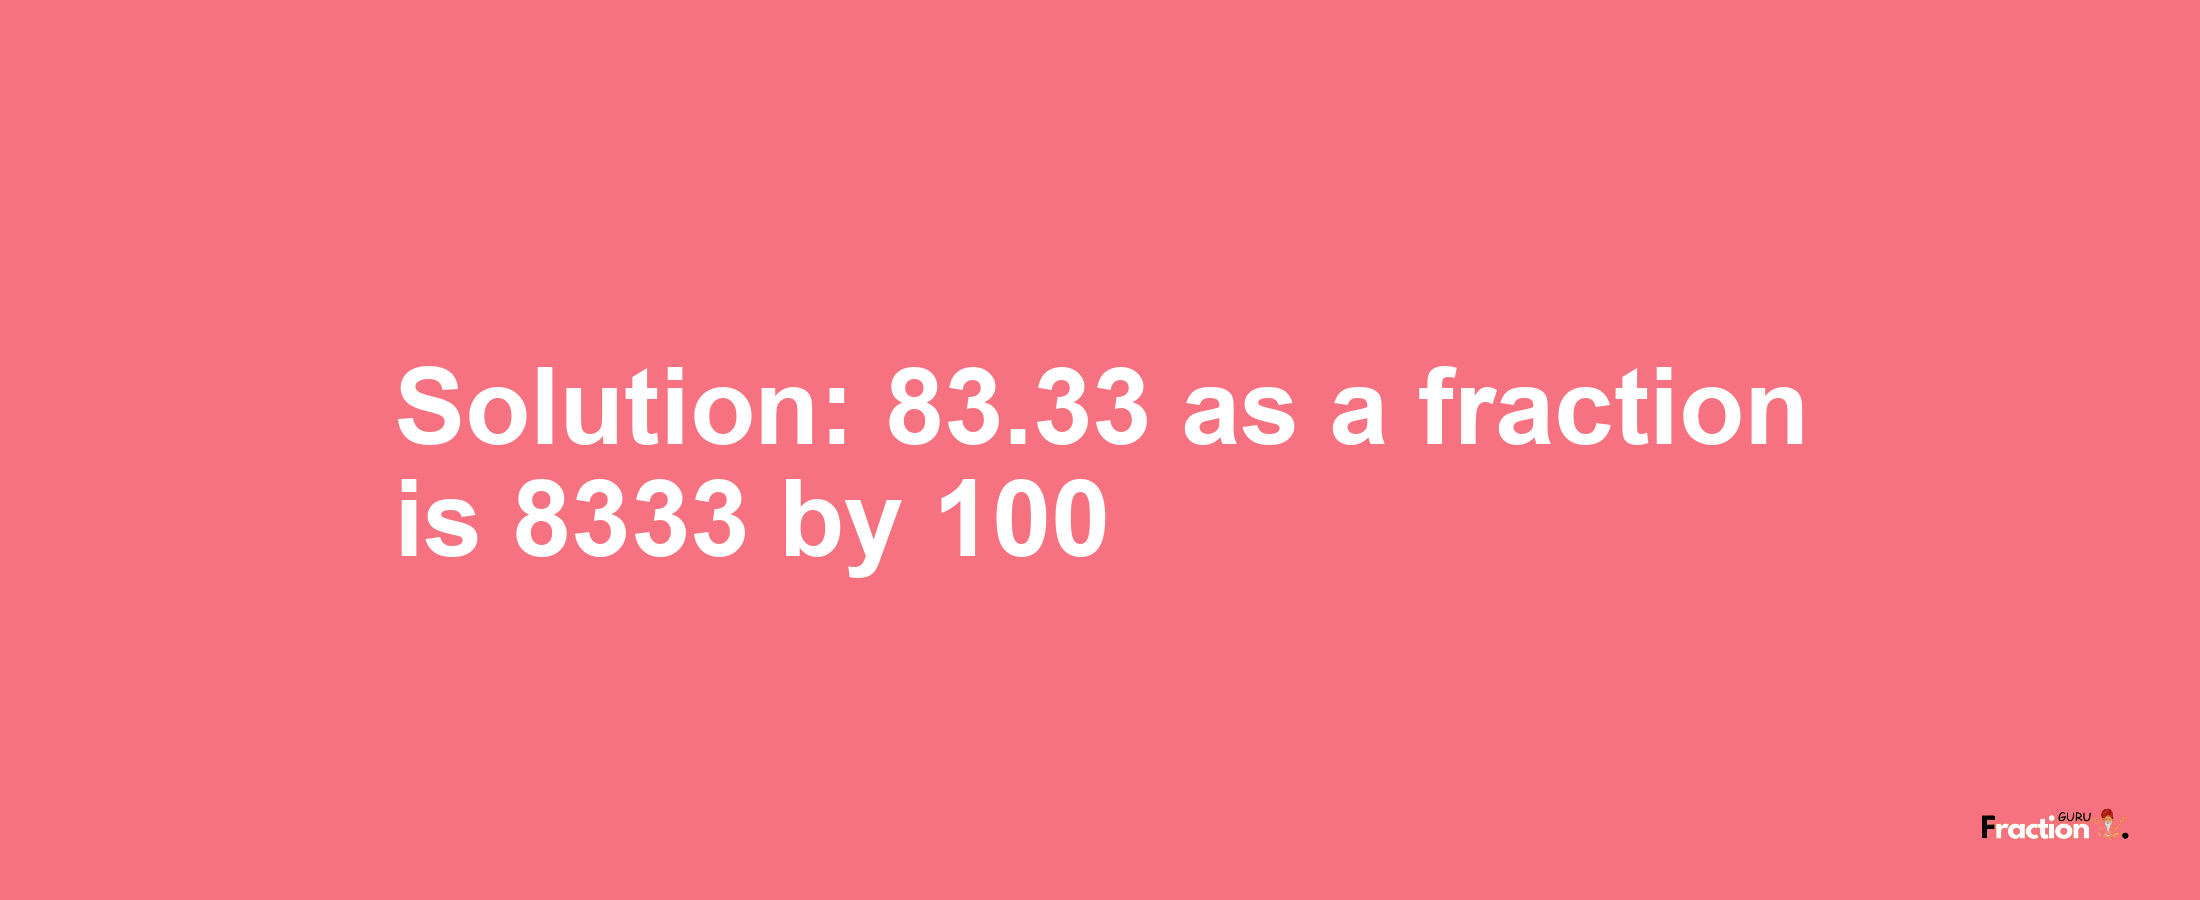 Solution:83.33 as a fraction is 8333/100